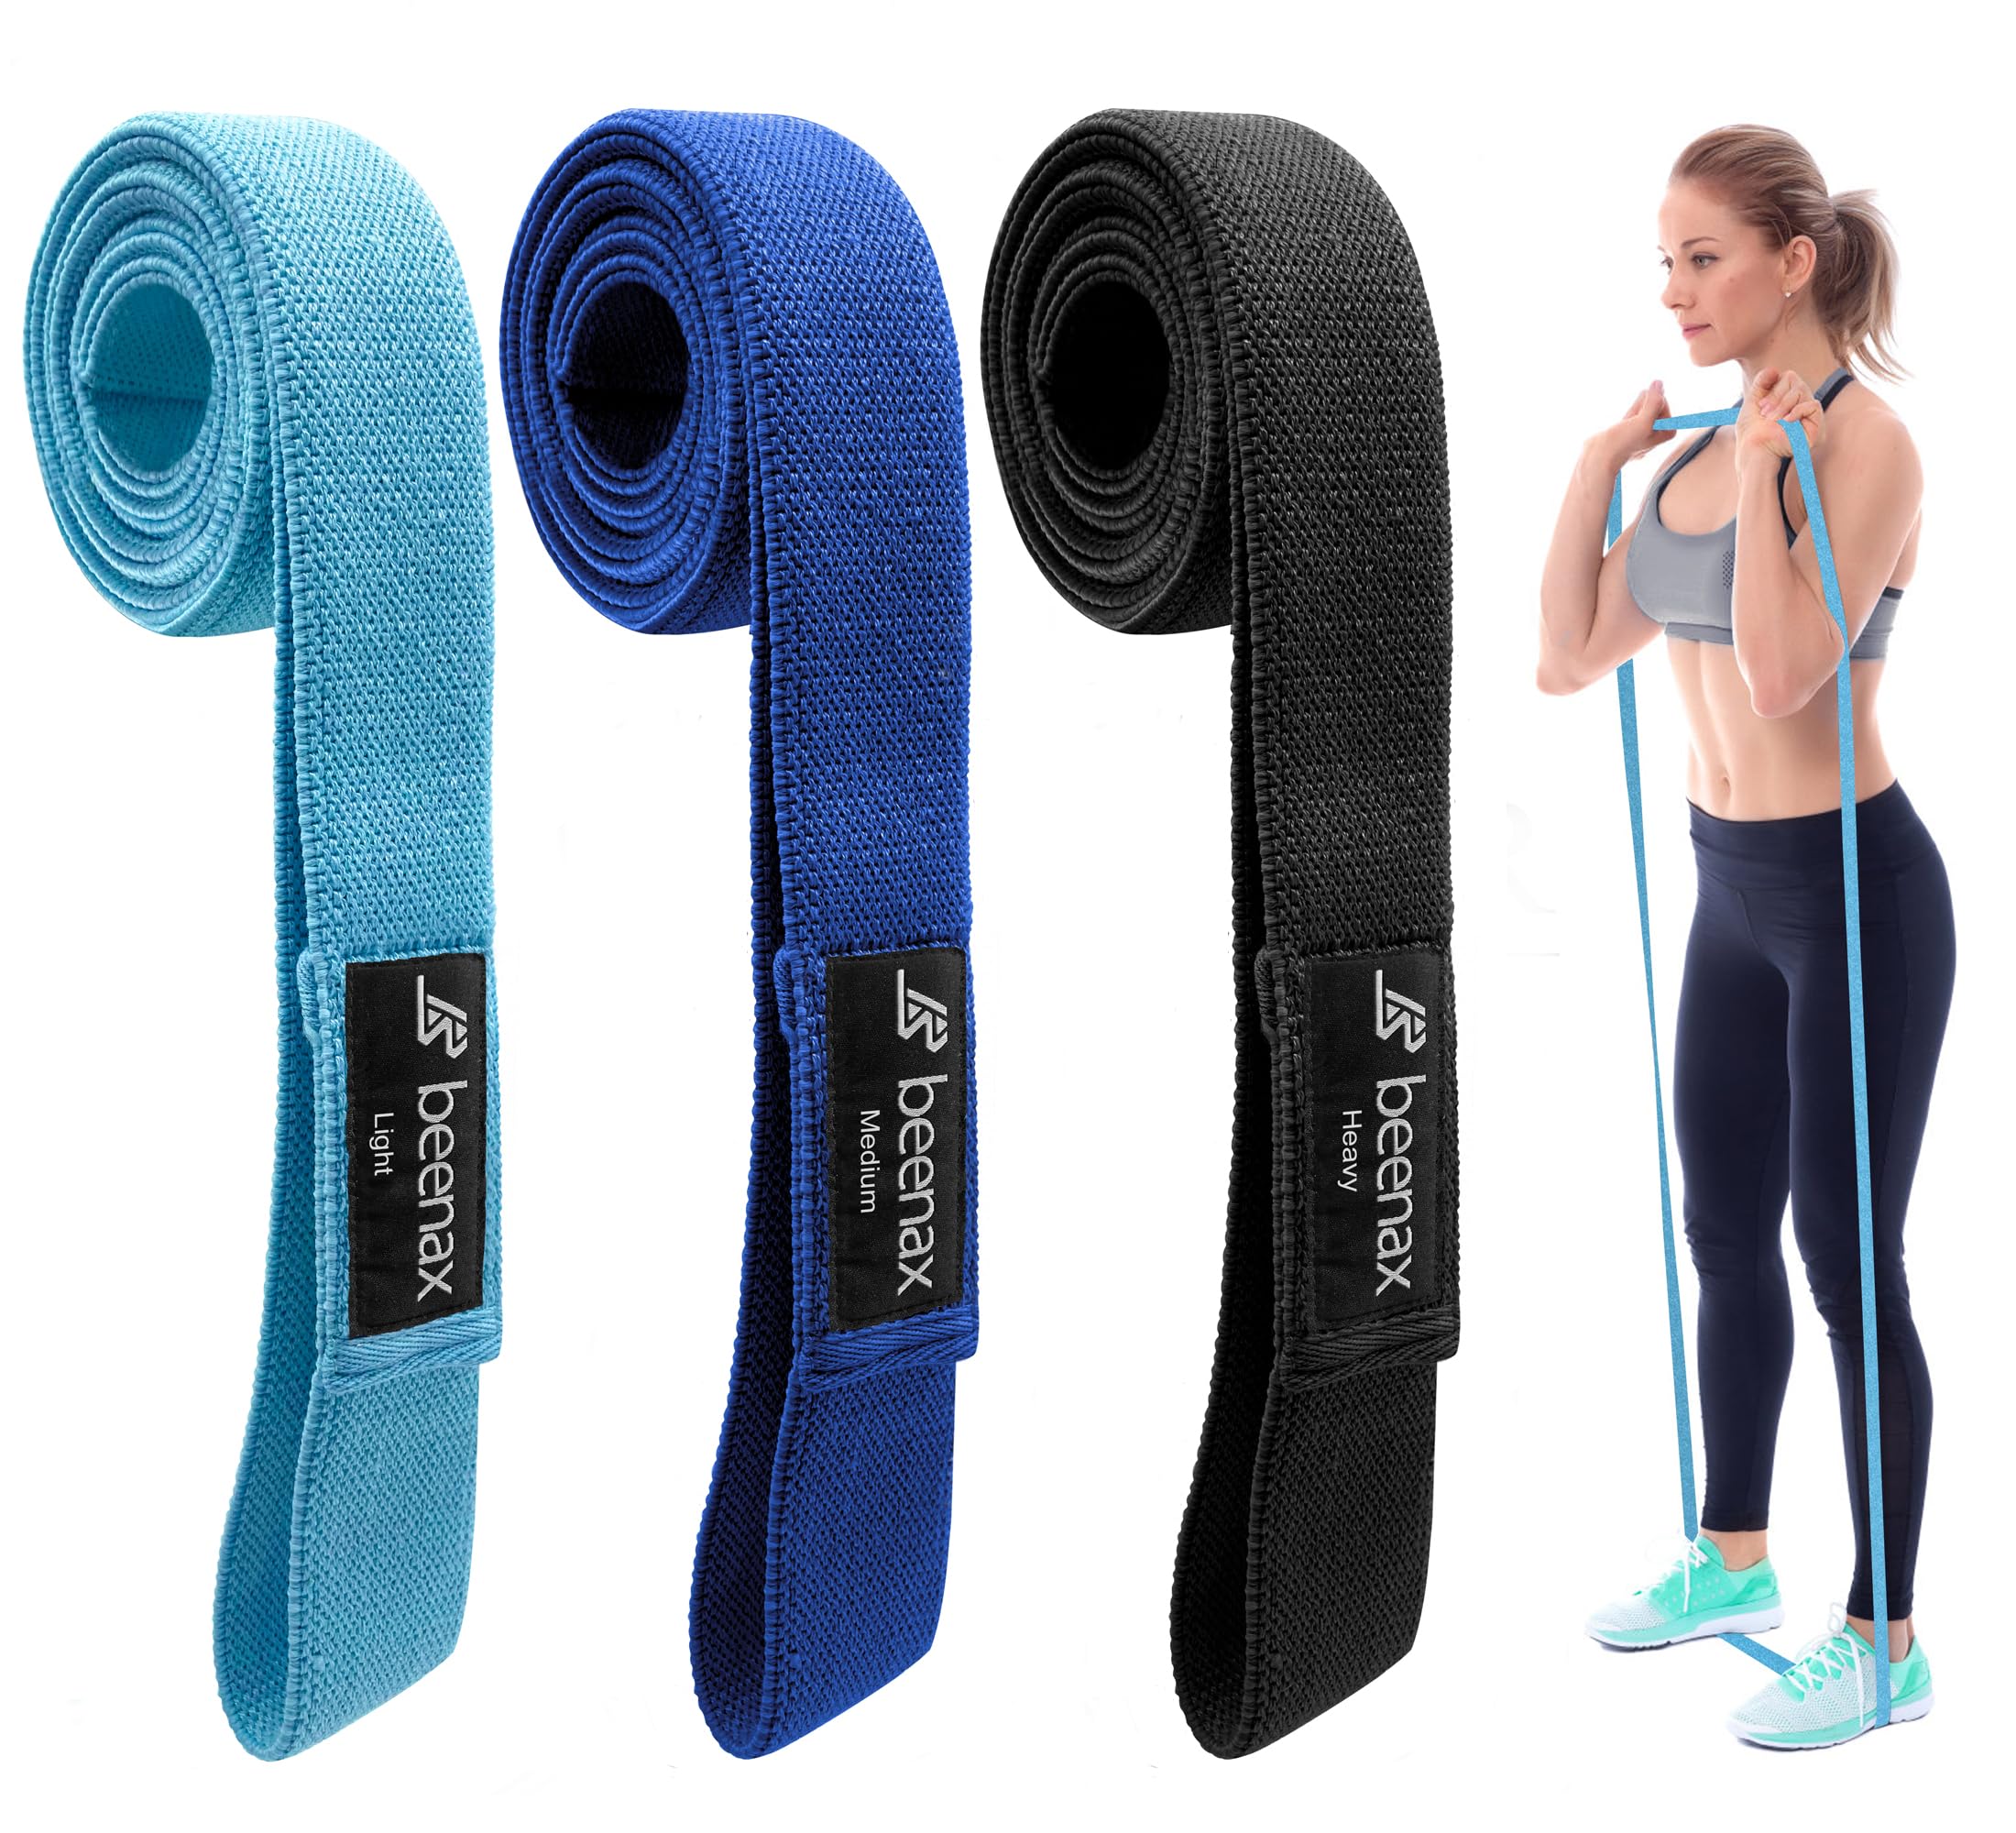 Bundle of Limm Resistance Bands Exercise Loops and Limm Booty Bands (Set of  3 Cotton/Cloth Fabric Bands)